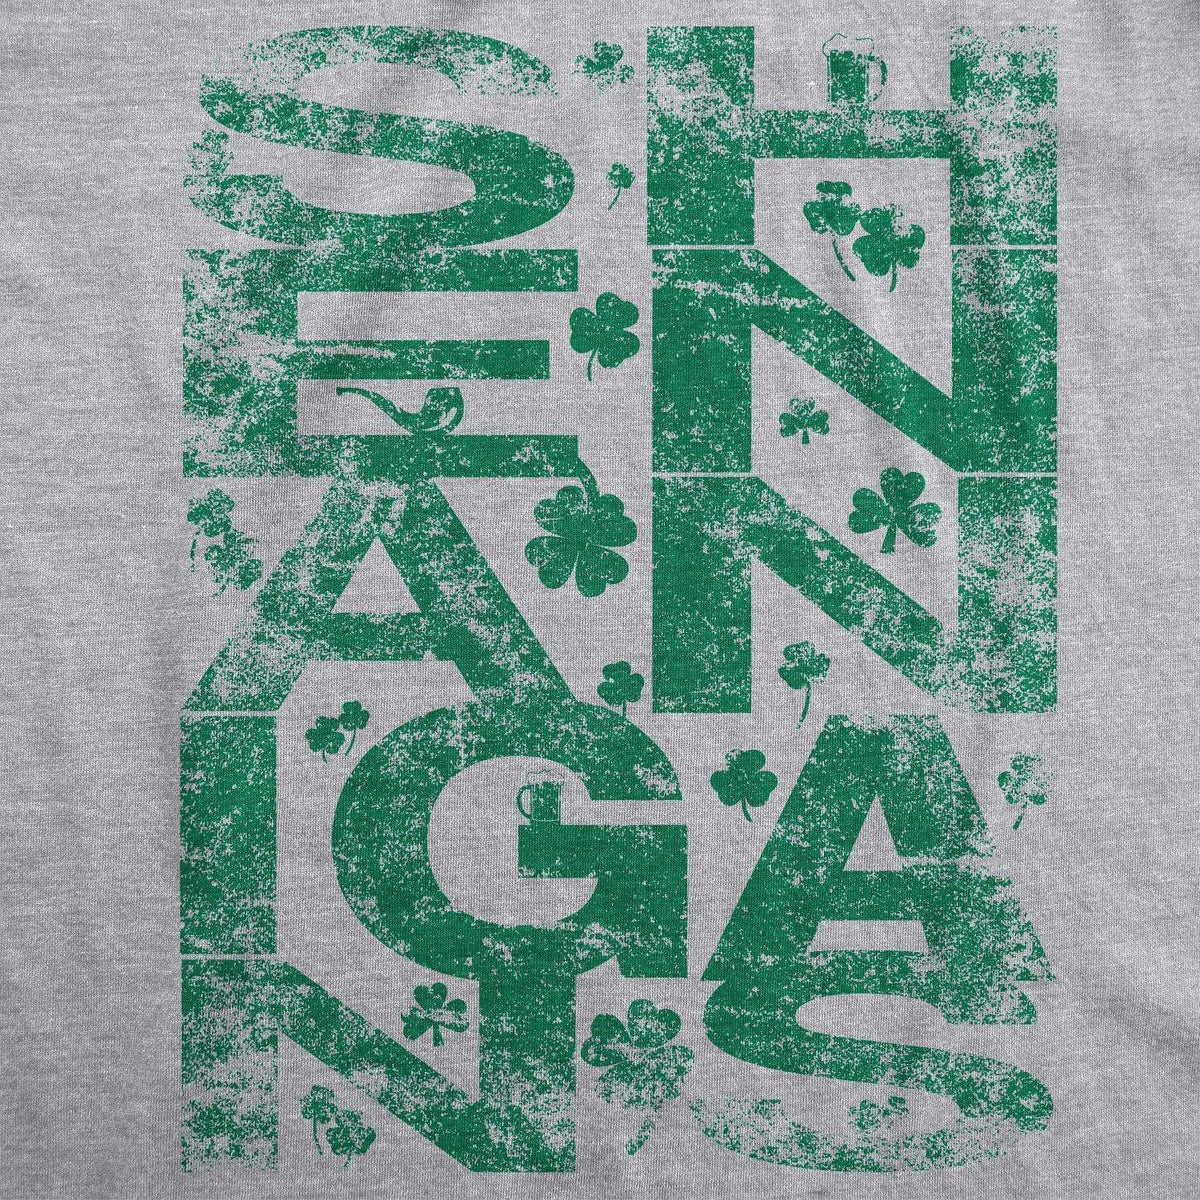 Shenanigans Covered In Clovers Men&#39;s Tshirt - Crazy Dog T-Shirts